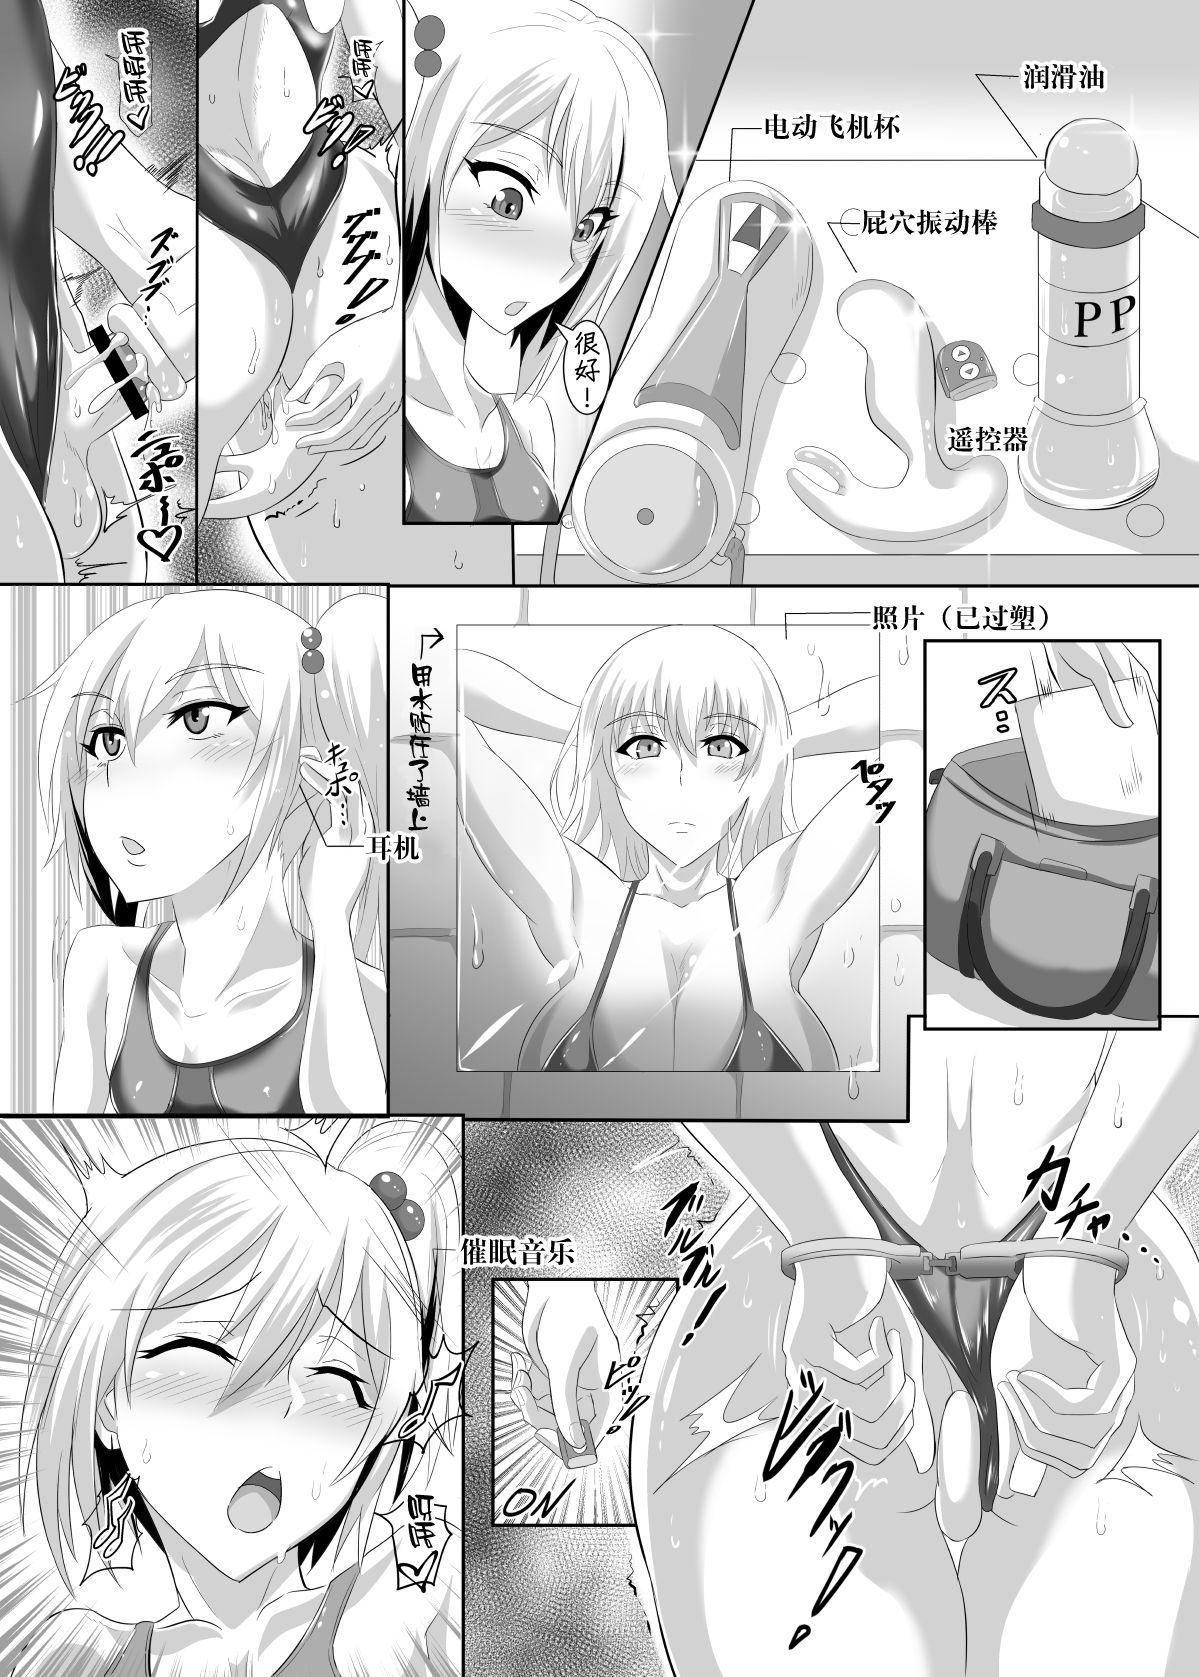 Blows Gehenna 6 - Fate grand order Small Tits - Page 12